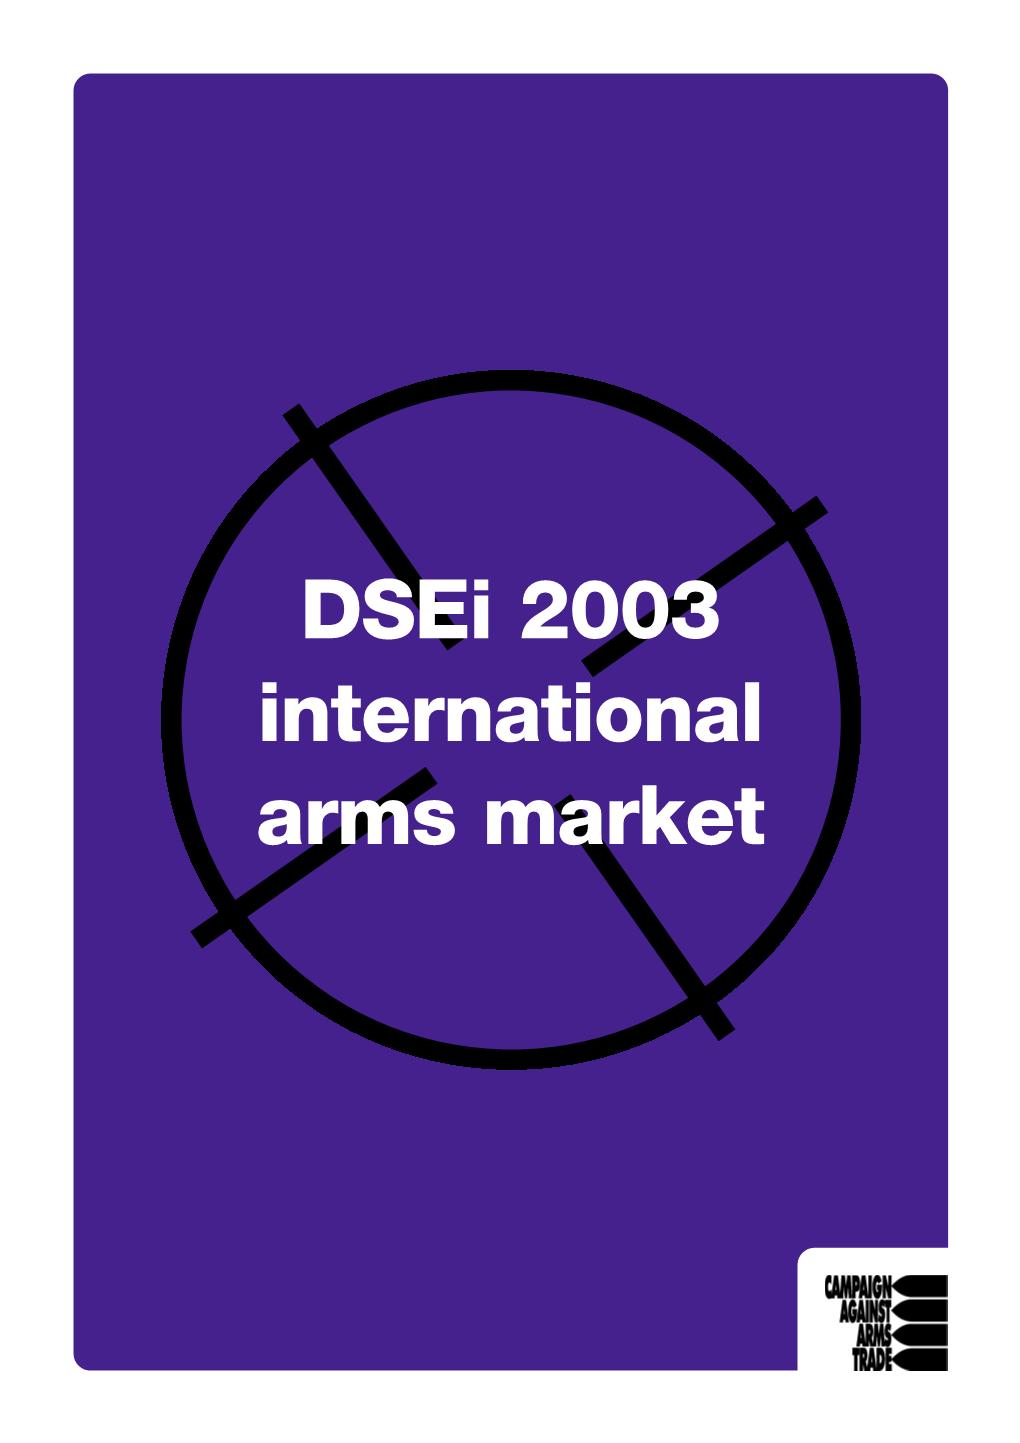 Dsei 2003 International Arms Market Published in the UK by Campaign Against Arms Trade 11 Goodwin Street, London N4 3HQ